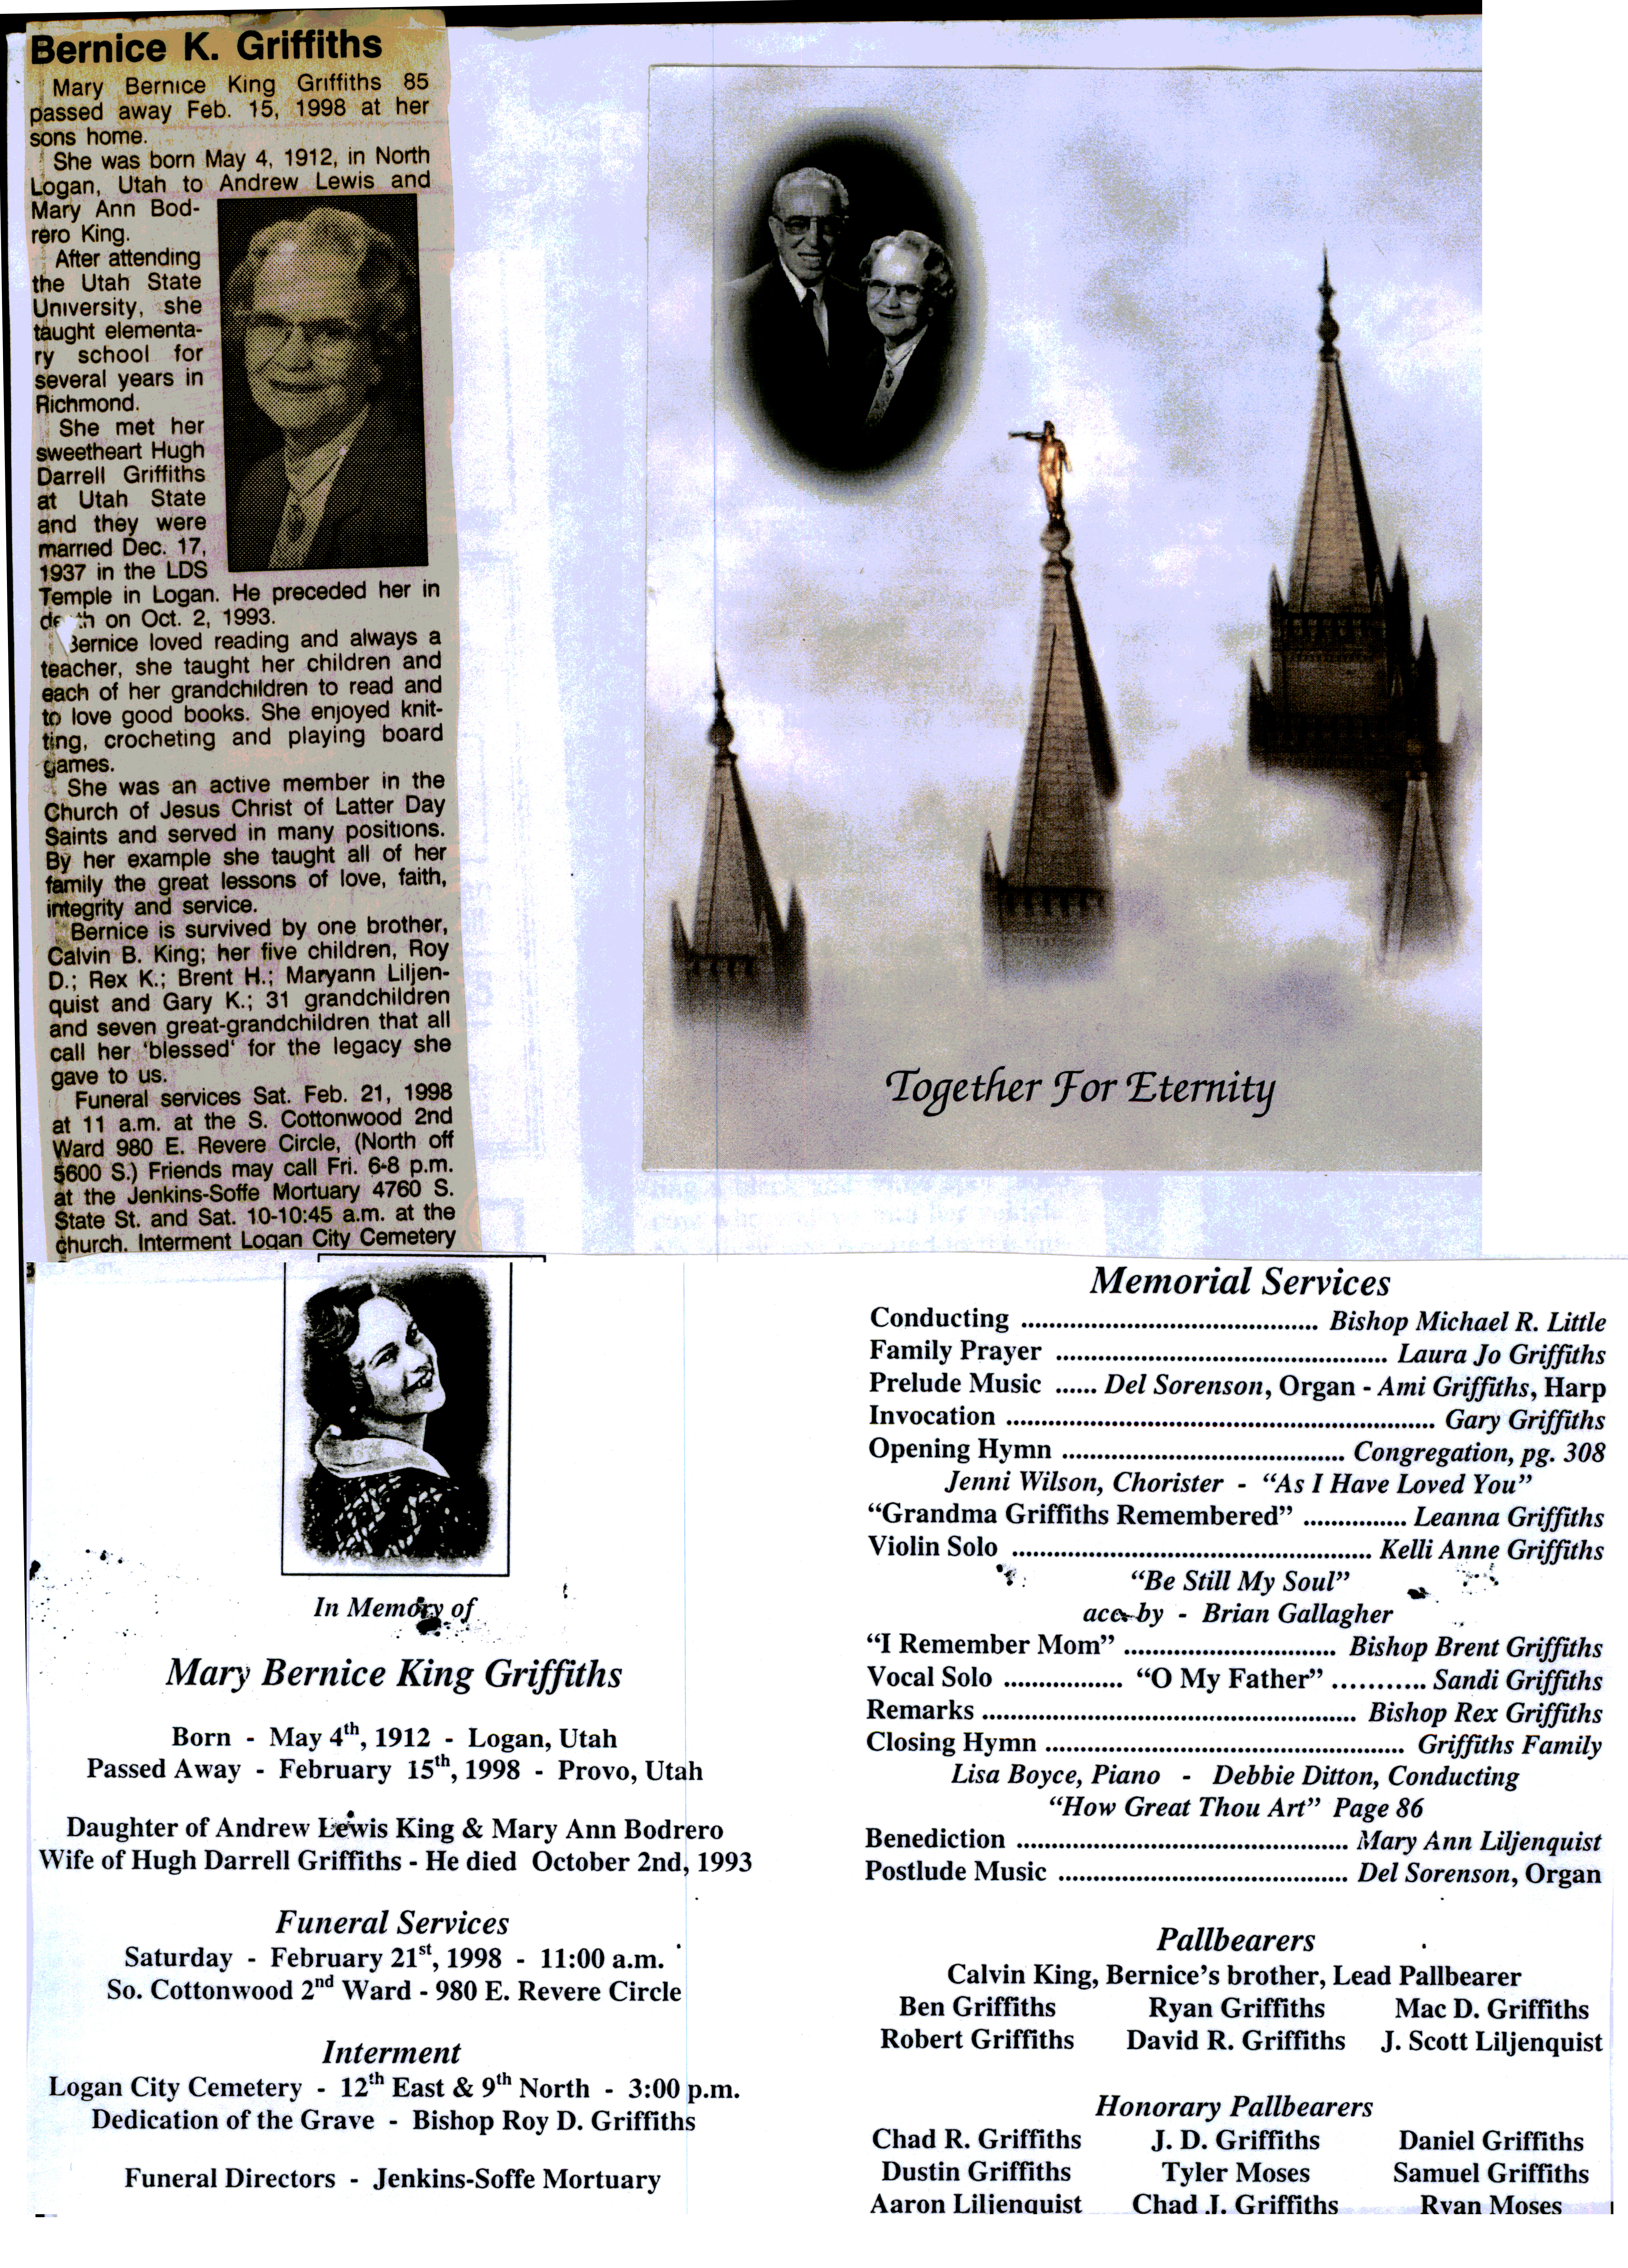 Mary Bernice King Griffiths obit and program